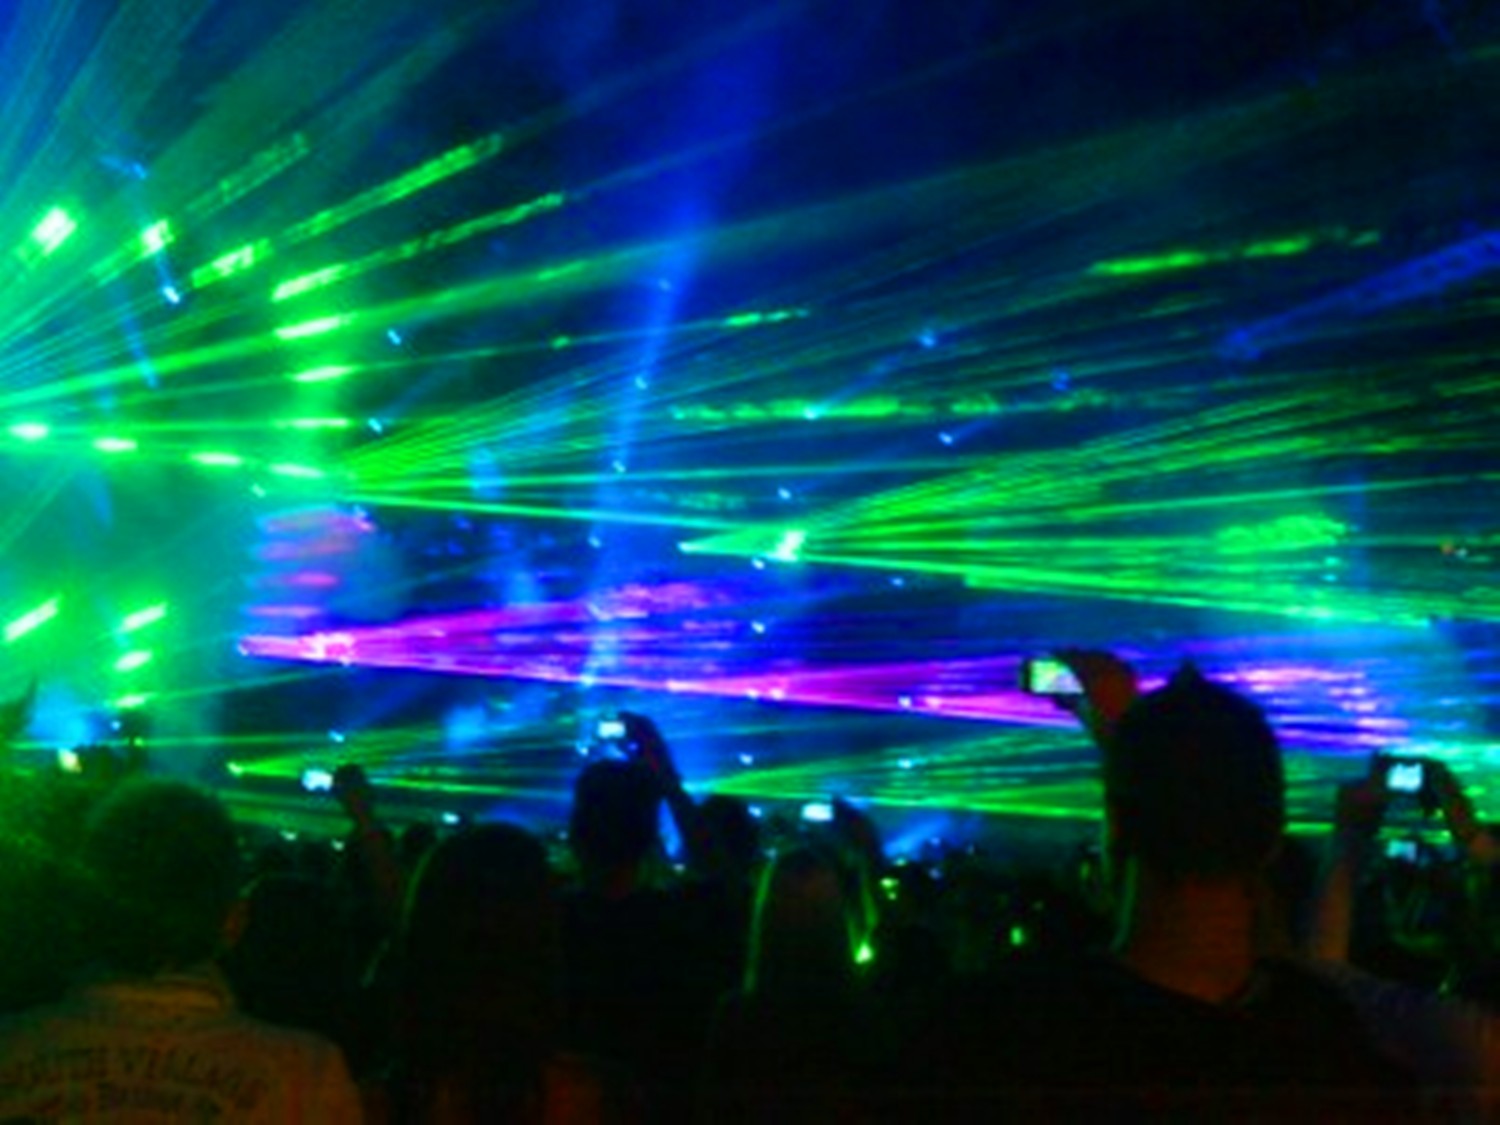 We love lasers